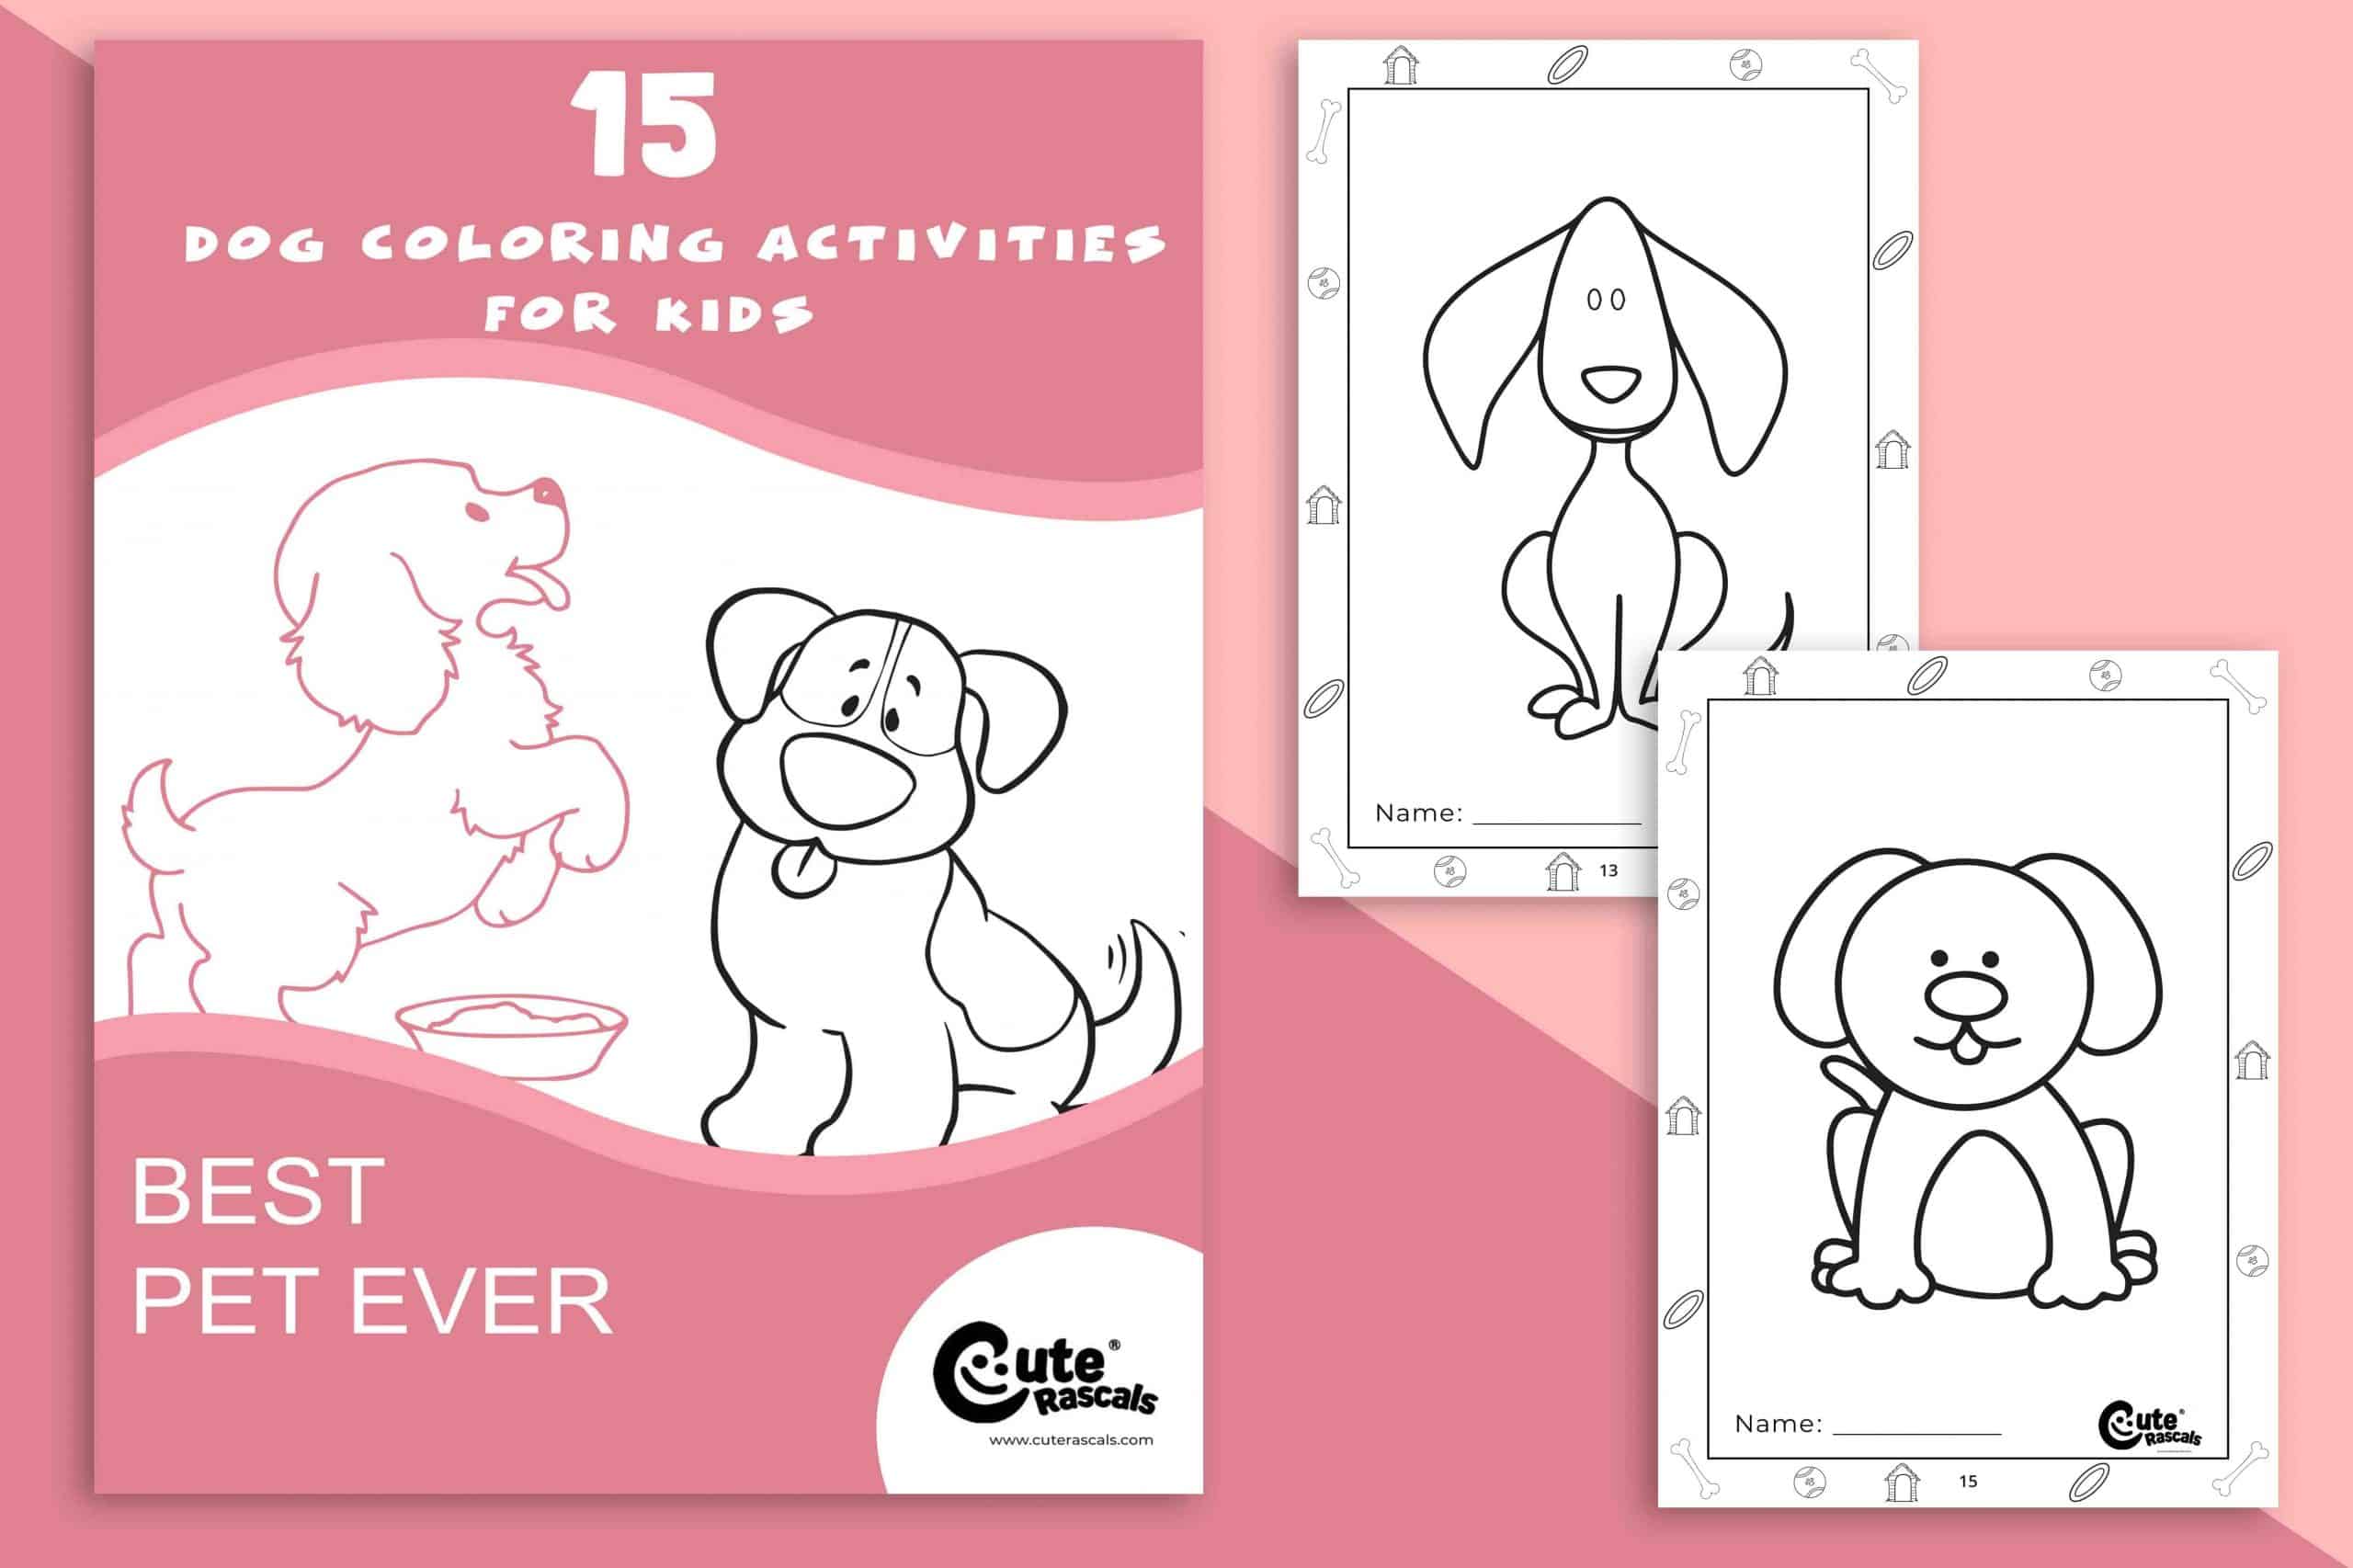 15 Absolutely Adorable Dog Coloring Pages to Melt Hearts